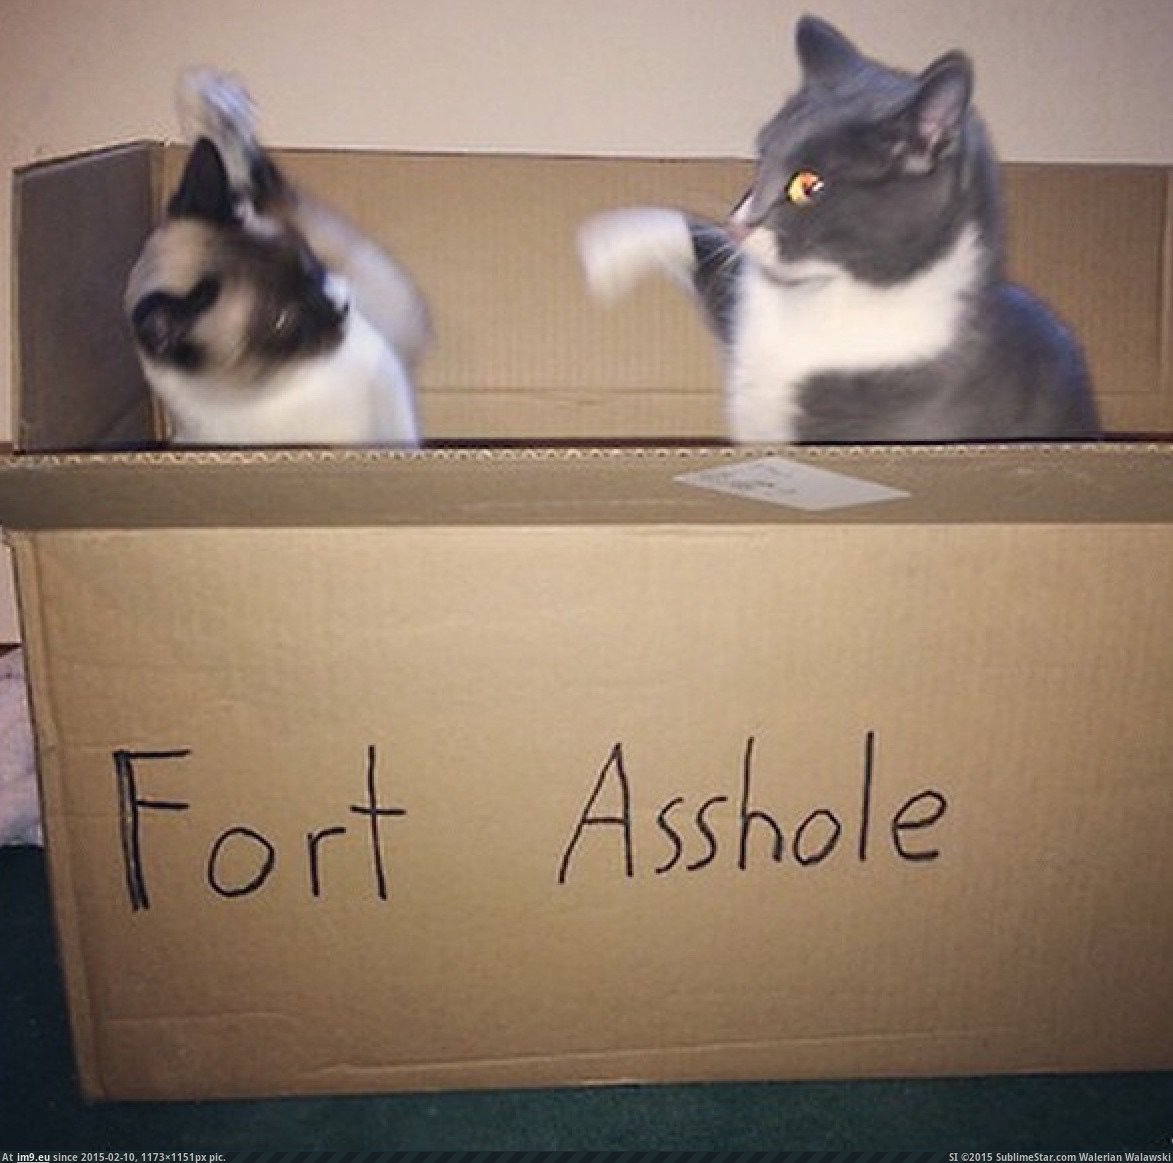 [Aww] Nothing like a cat fight in Fort Asshole (in My r/AWW favs)